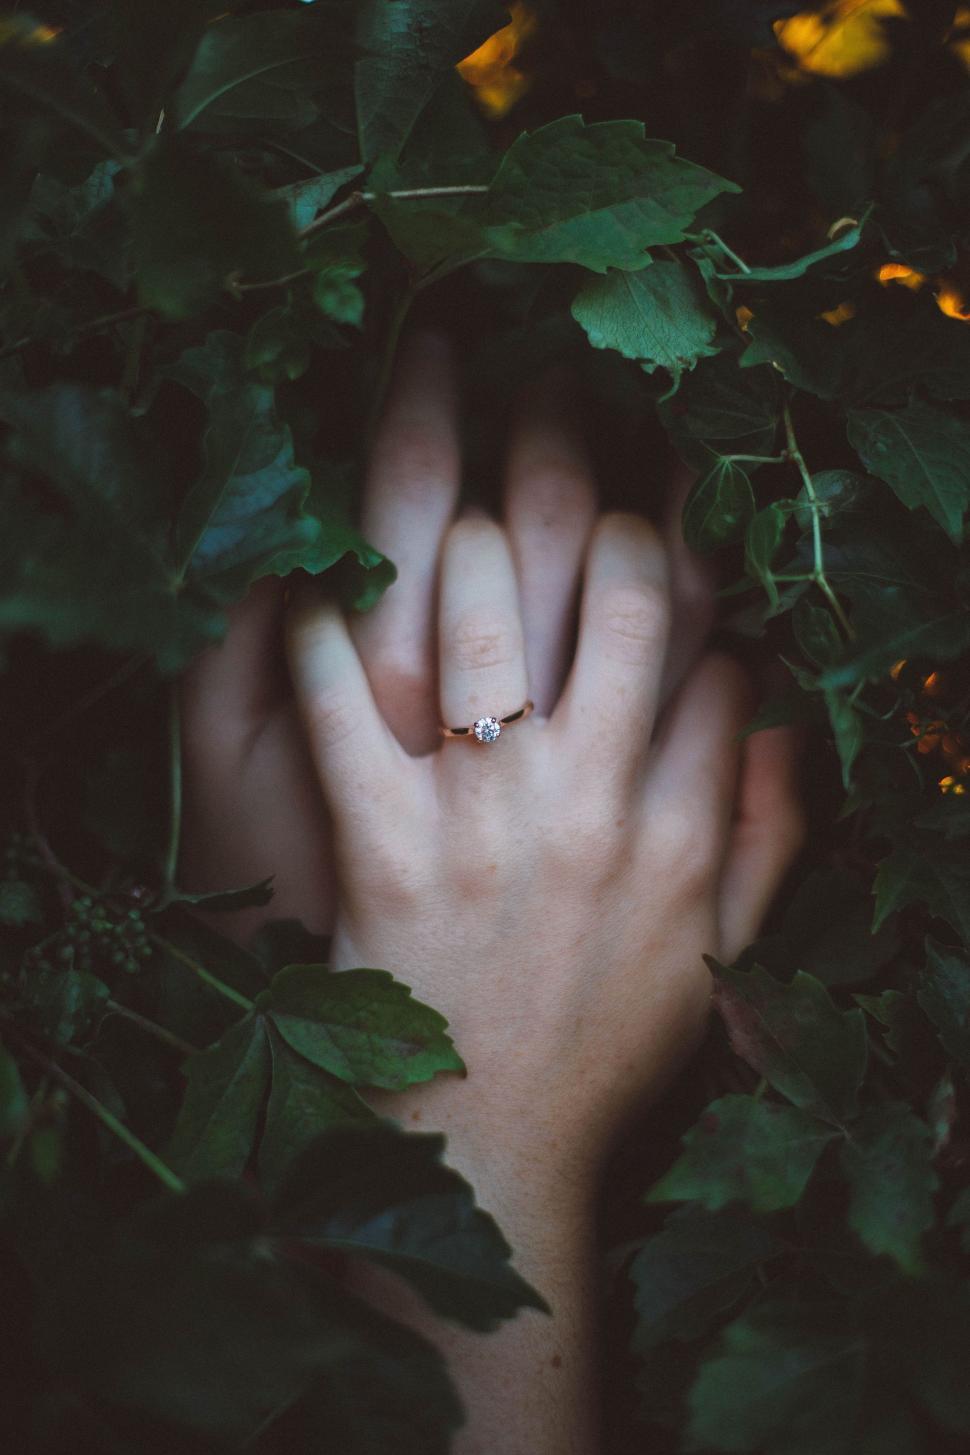 Free Image of Hands and Wedding Ring  